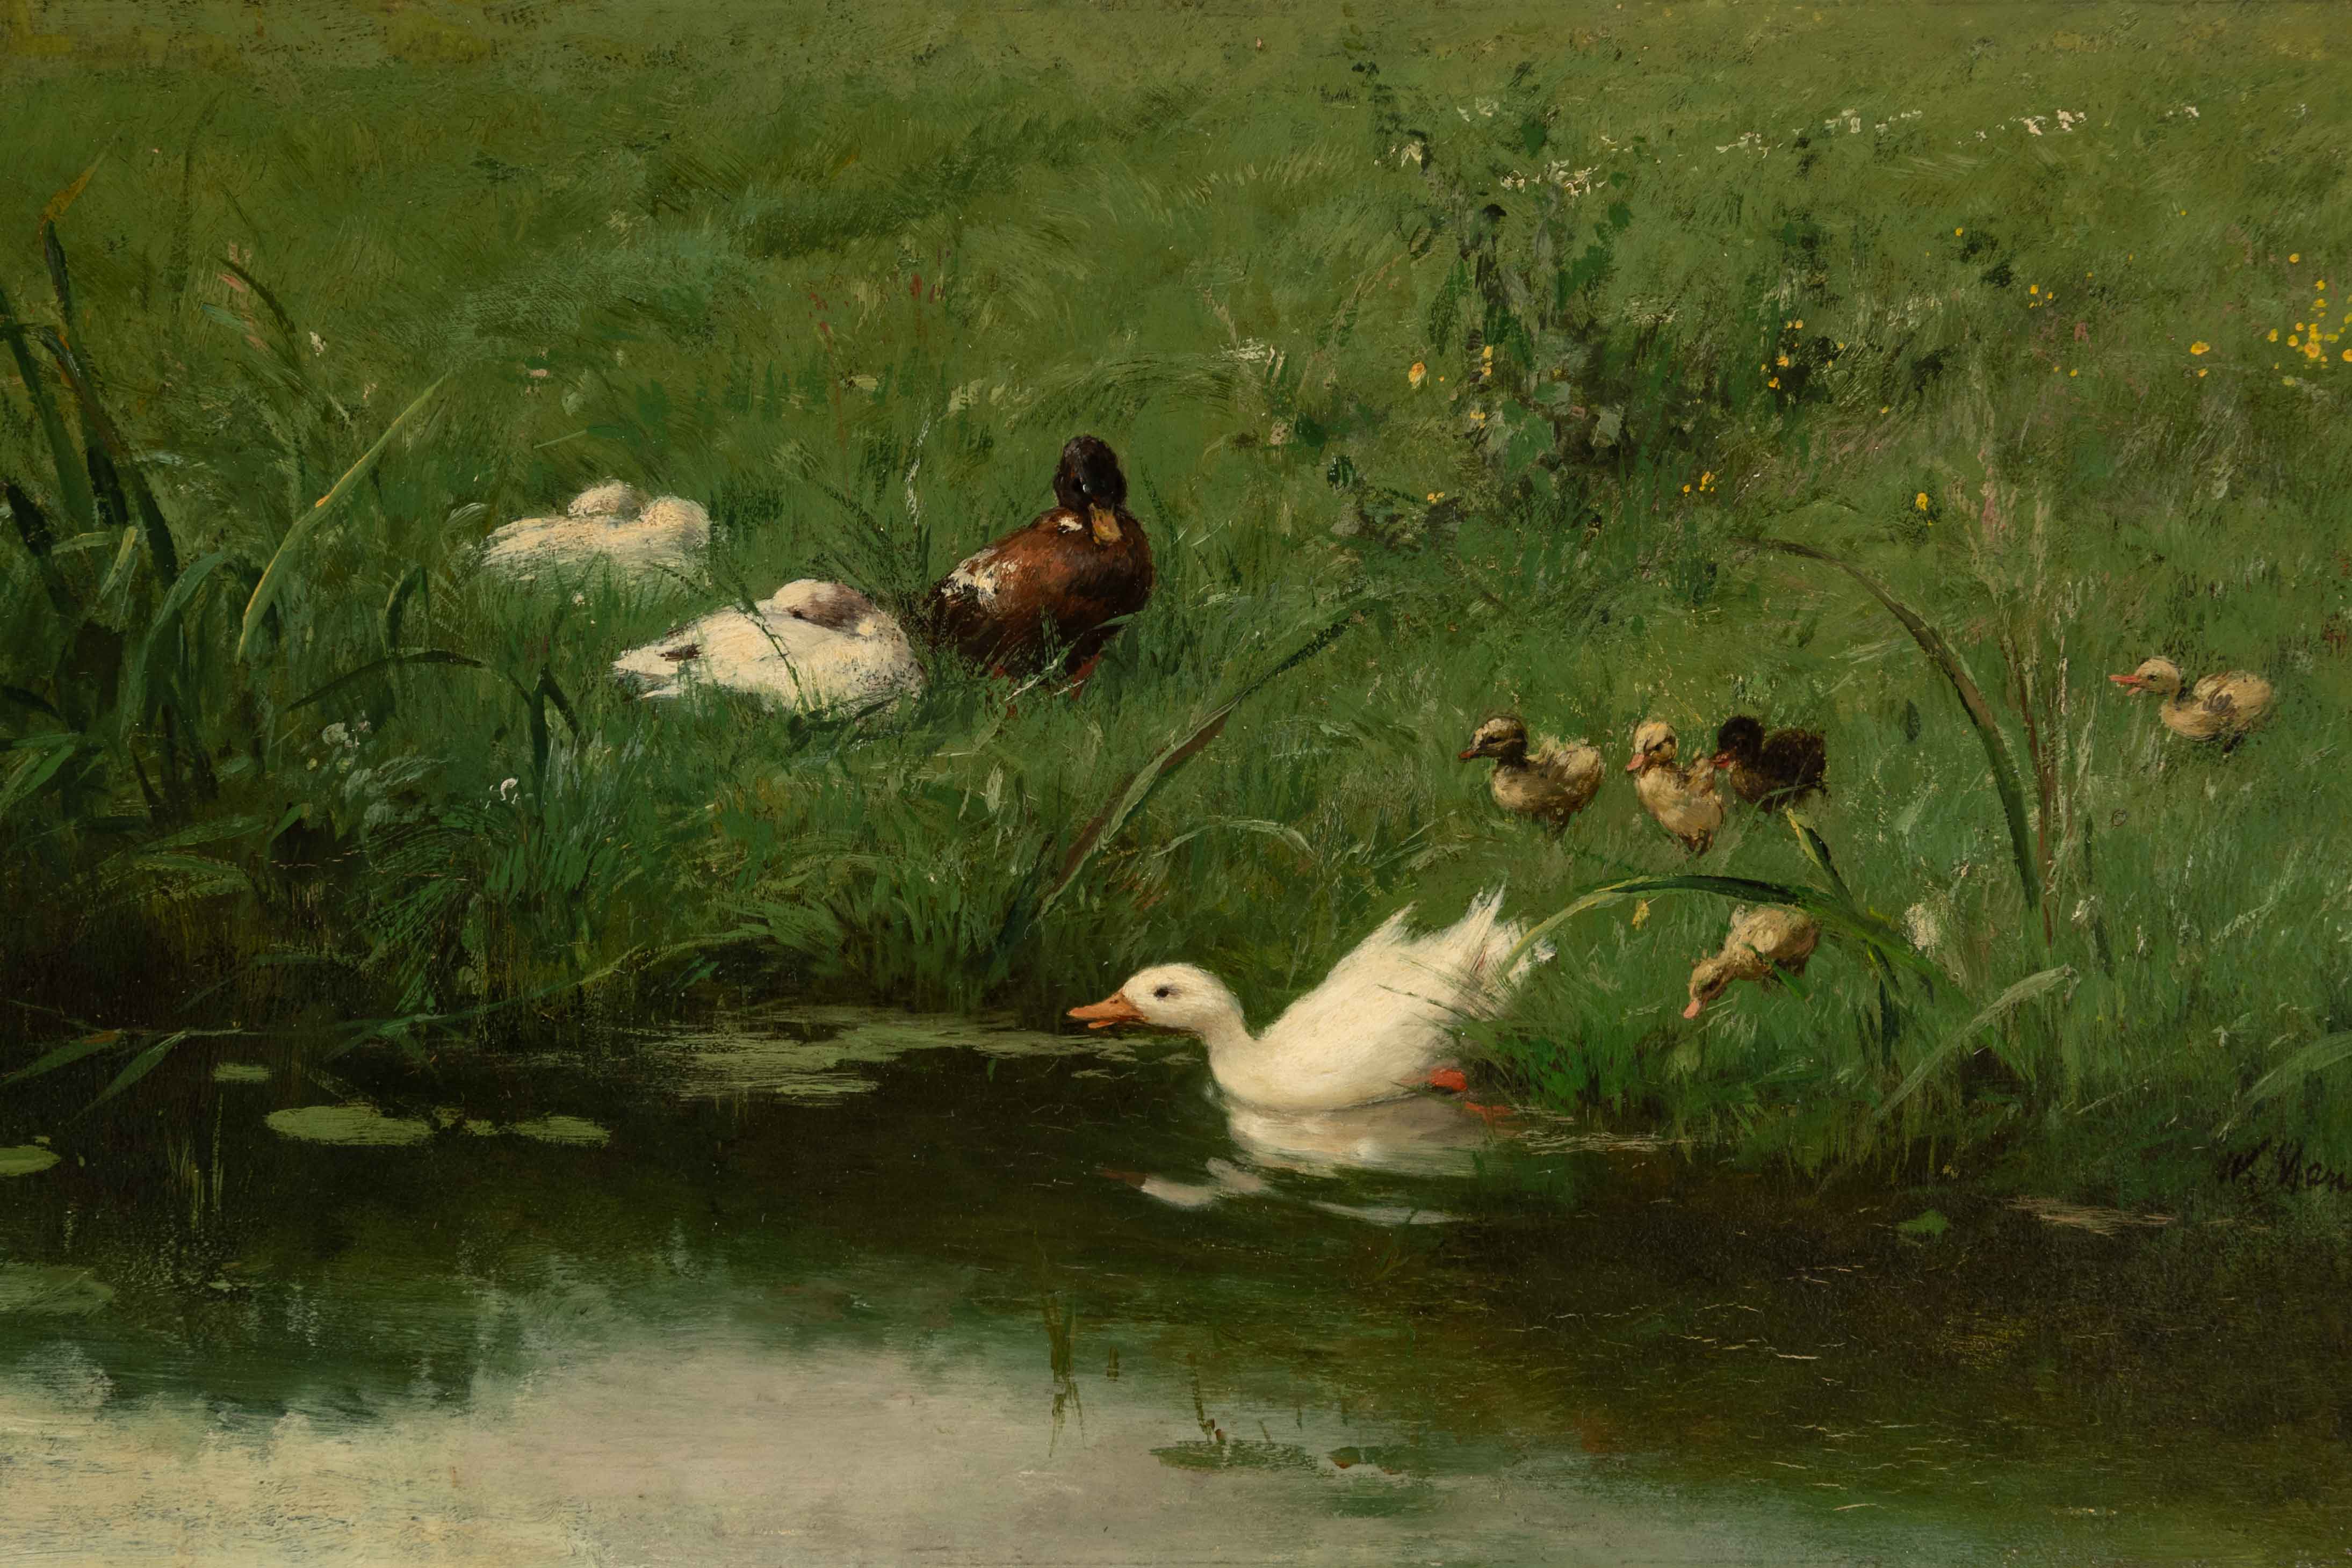 Willem Maris (Dutch, 1844–1910) Ducks, about 1875–80 Oil on panel 8 5/8 x 16 5/8 in. 17 in. x 25 in. x 2 3/4 in. framed Bequest of Charles Phelps Taft and Anna Sinton Taft, 1931.408